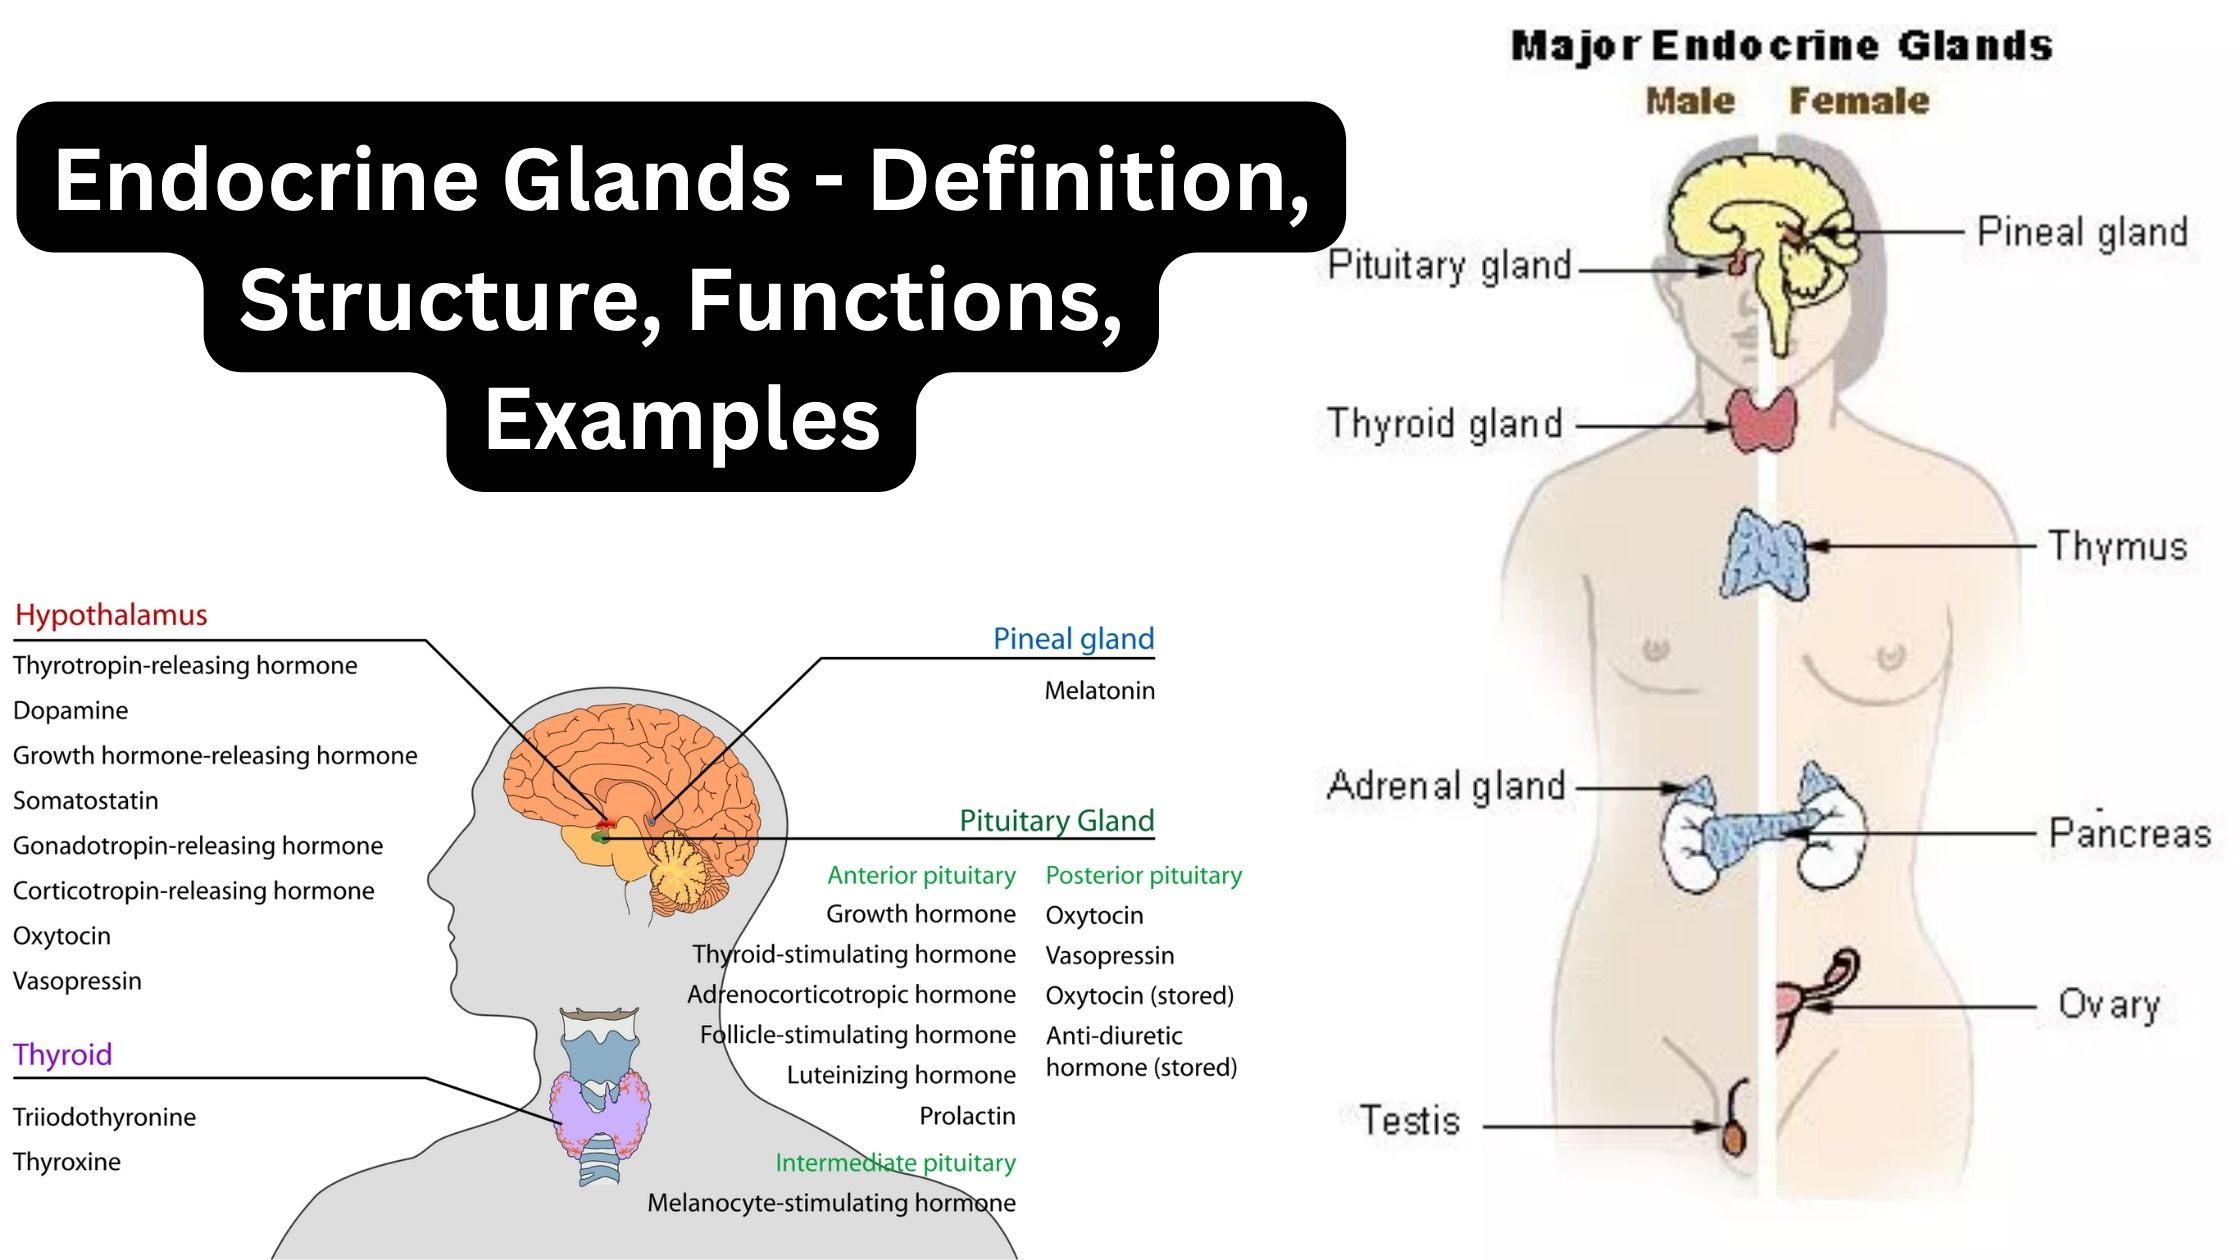 Endocrine Glands - Definition, Structure, Functions, Examples